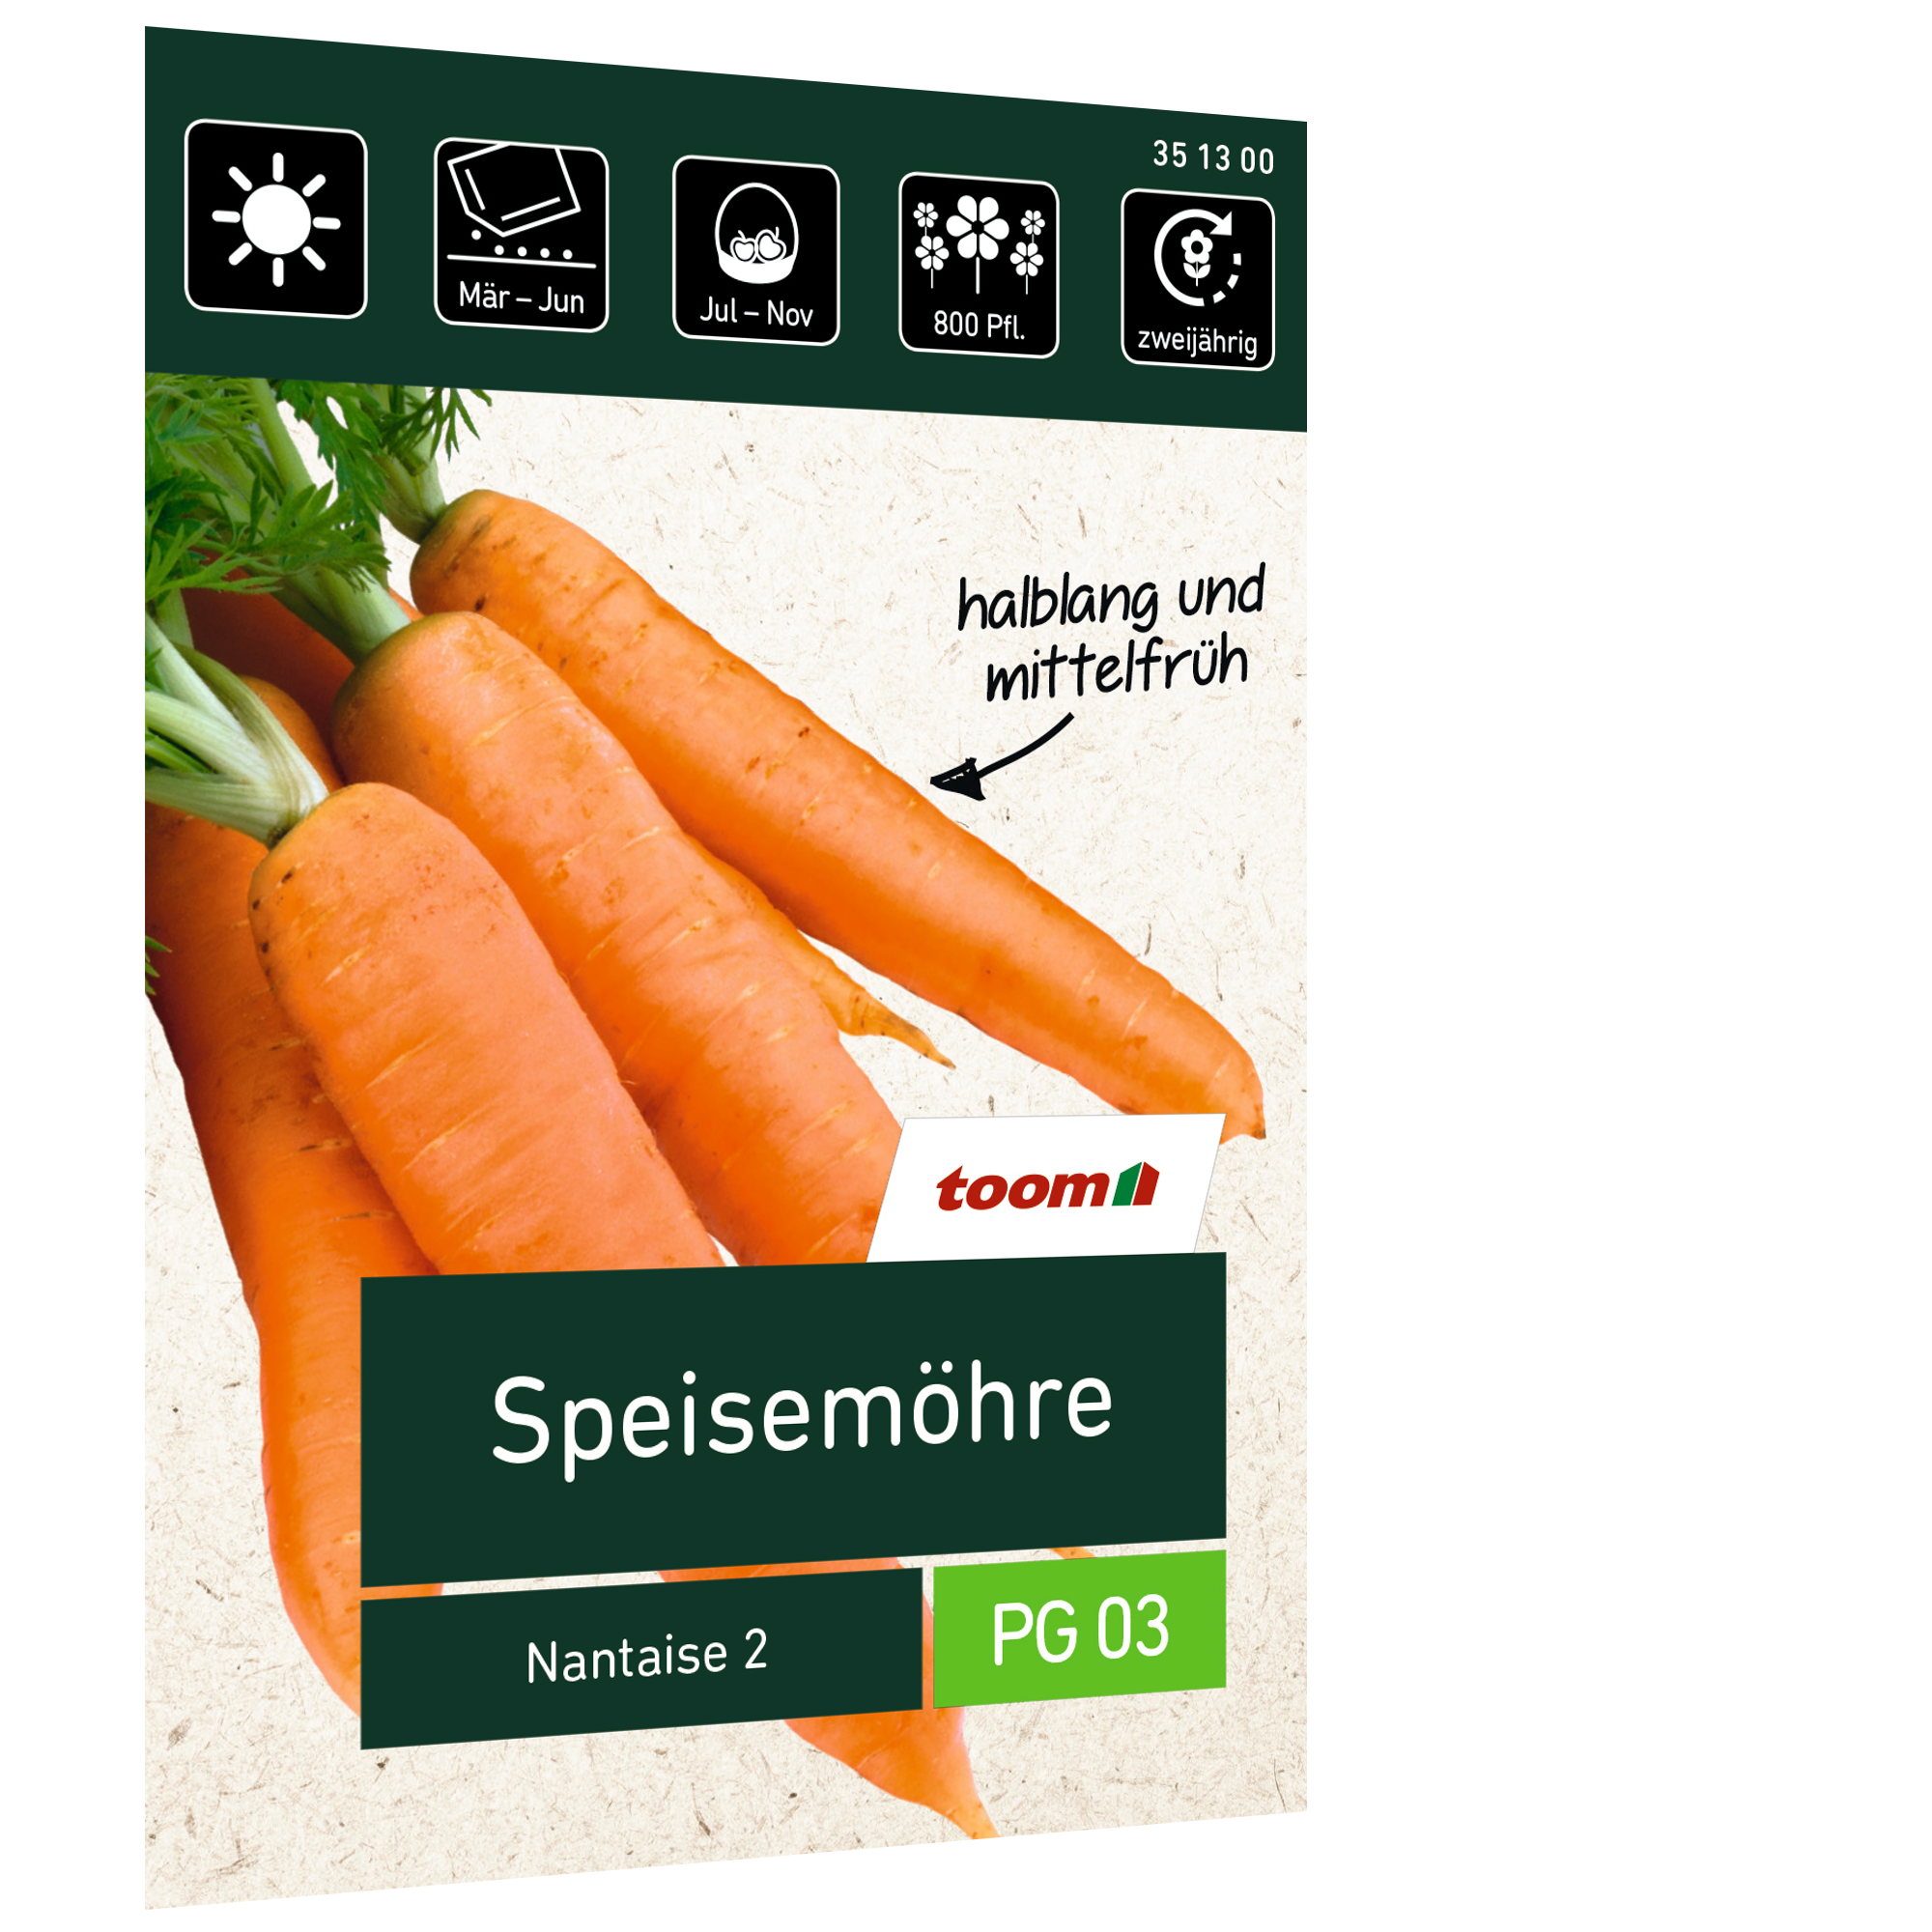 Speisemöhre 'Nantaise 2' + product picture